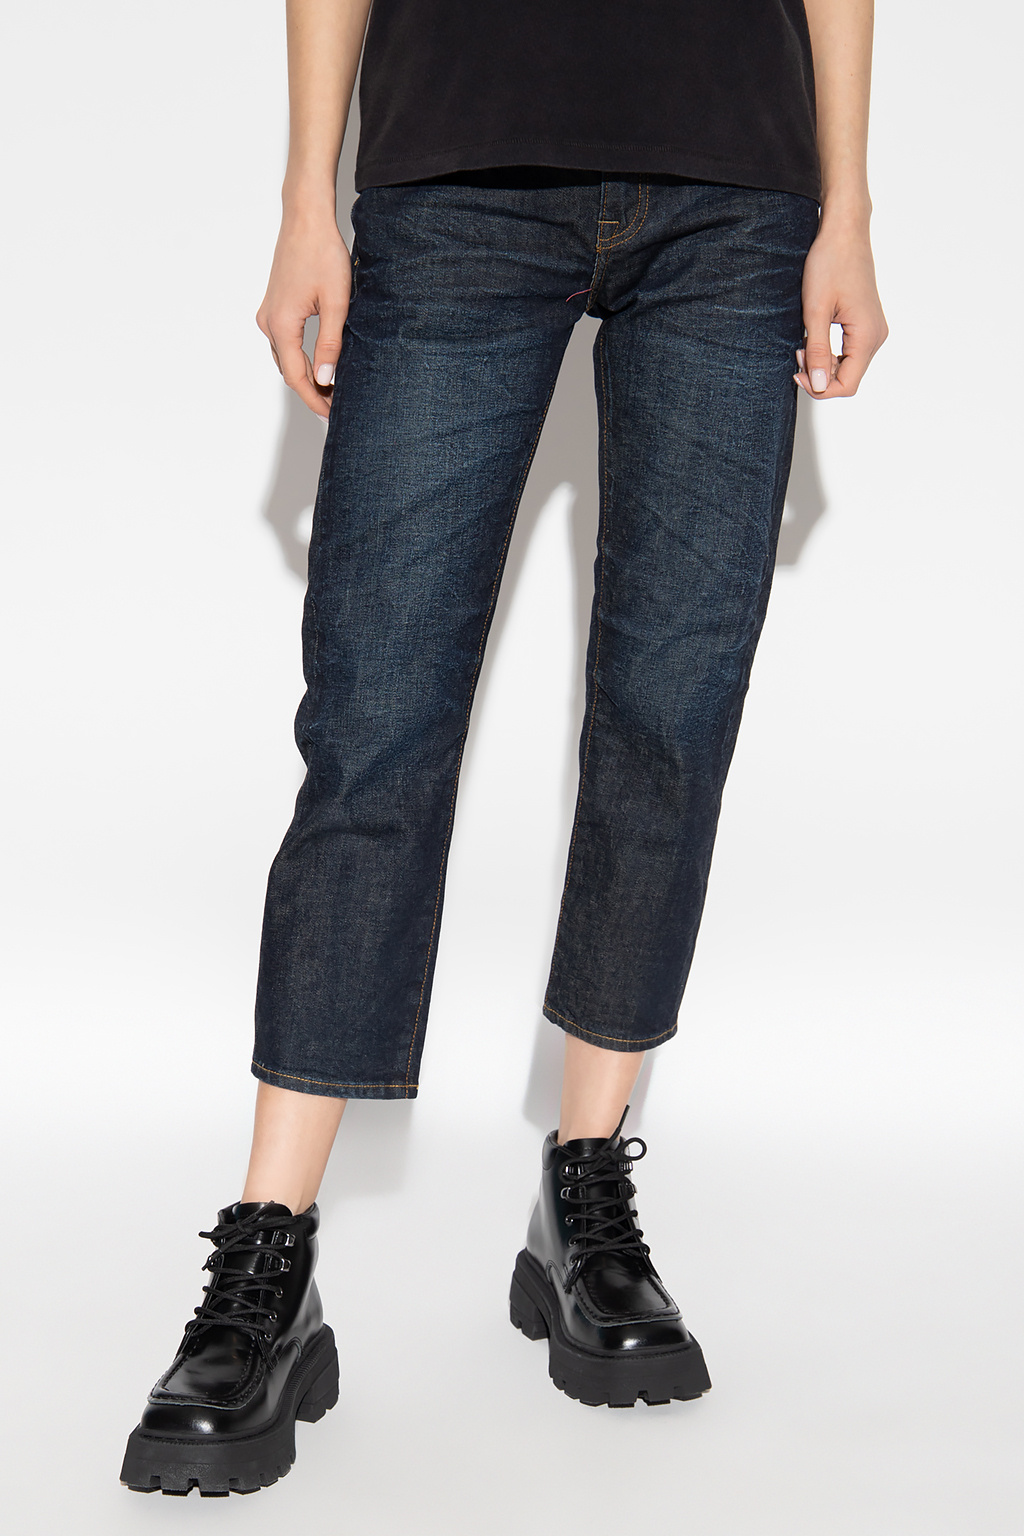 R13 Cropped jeans